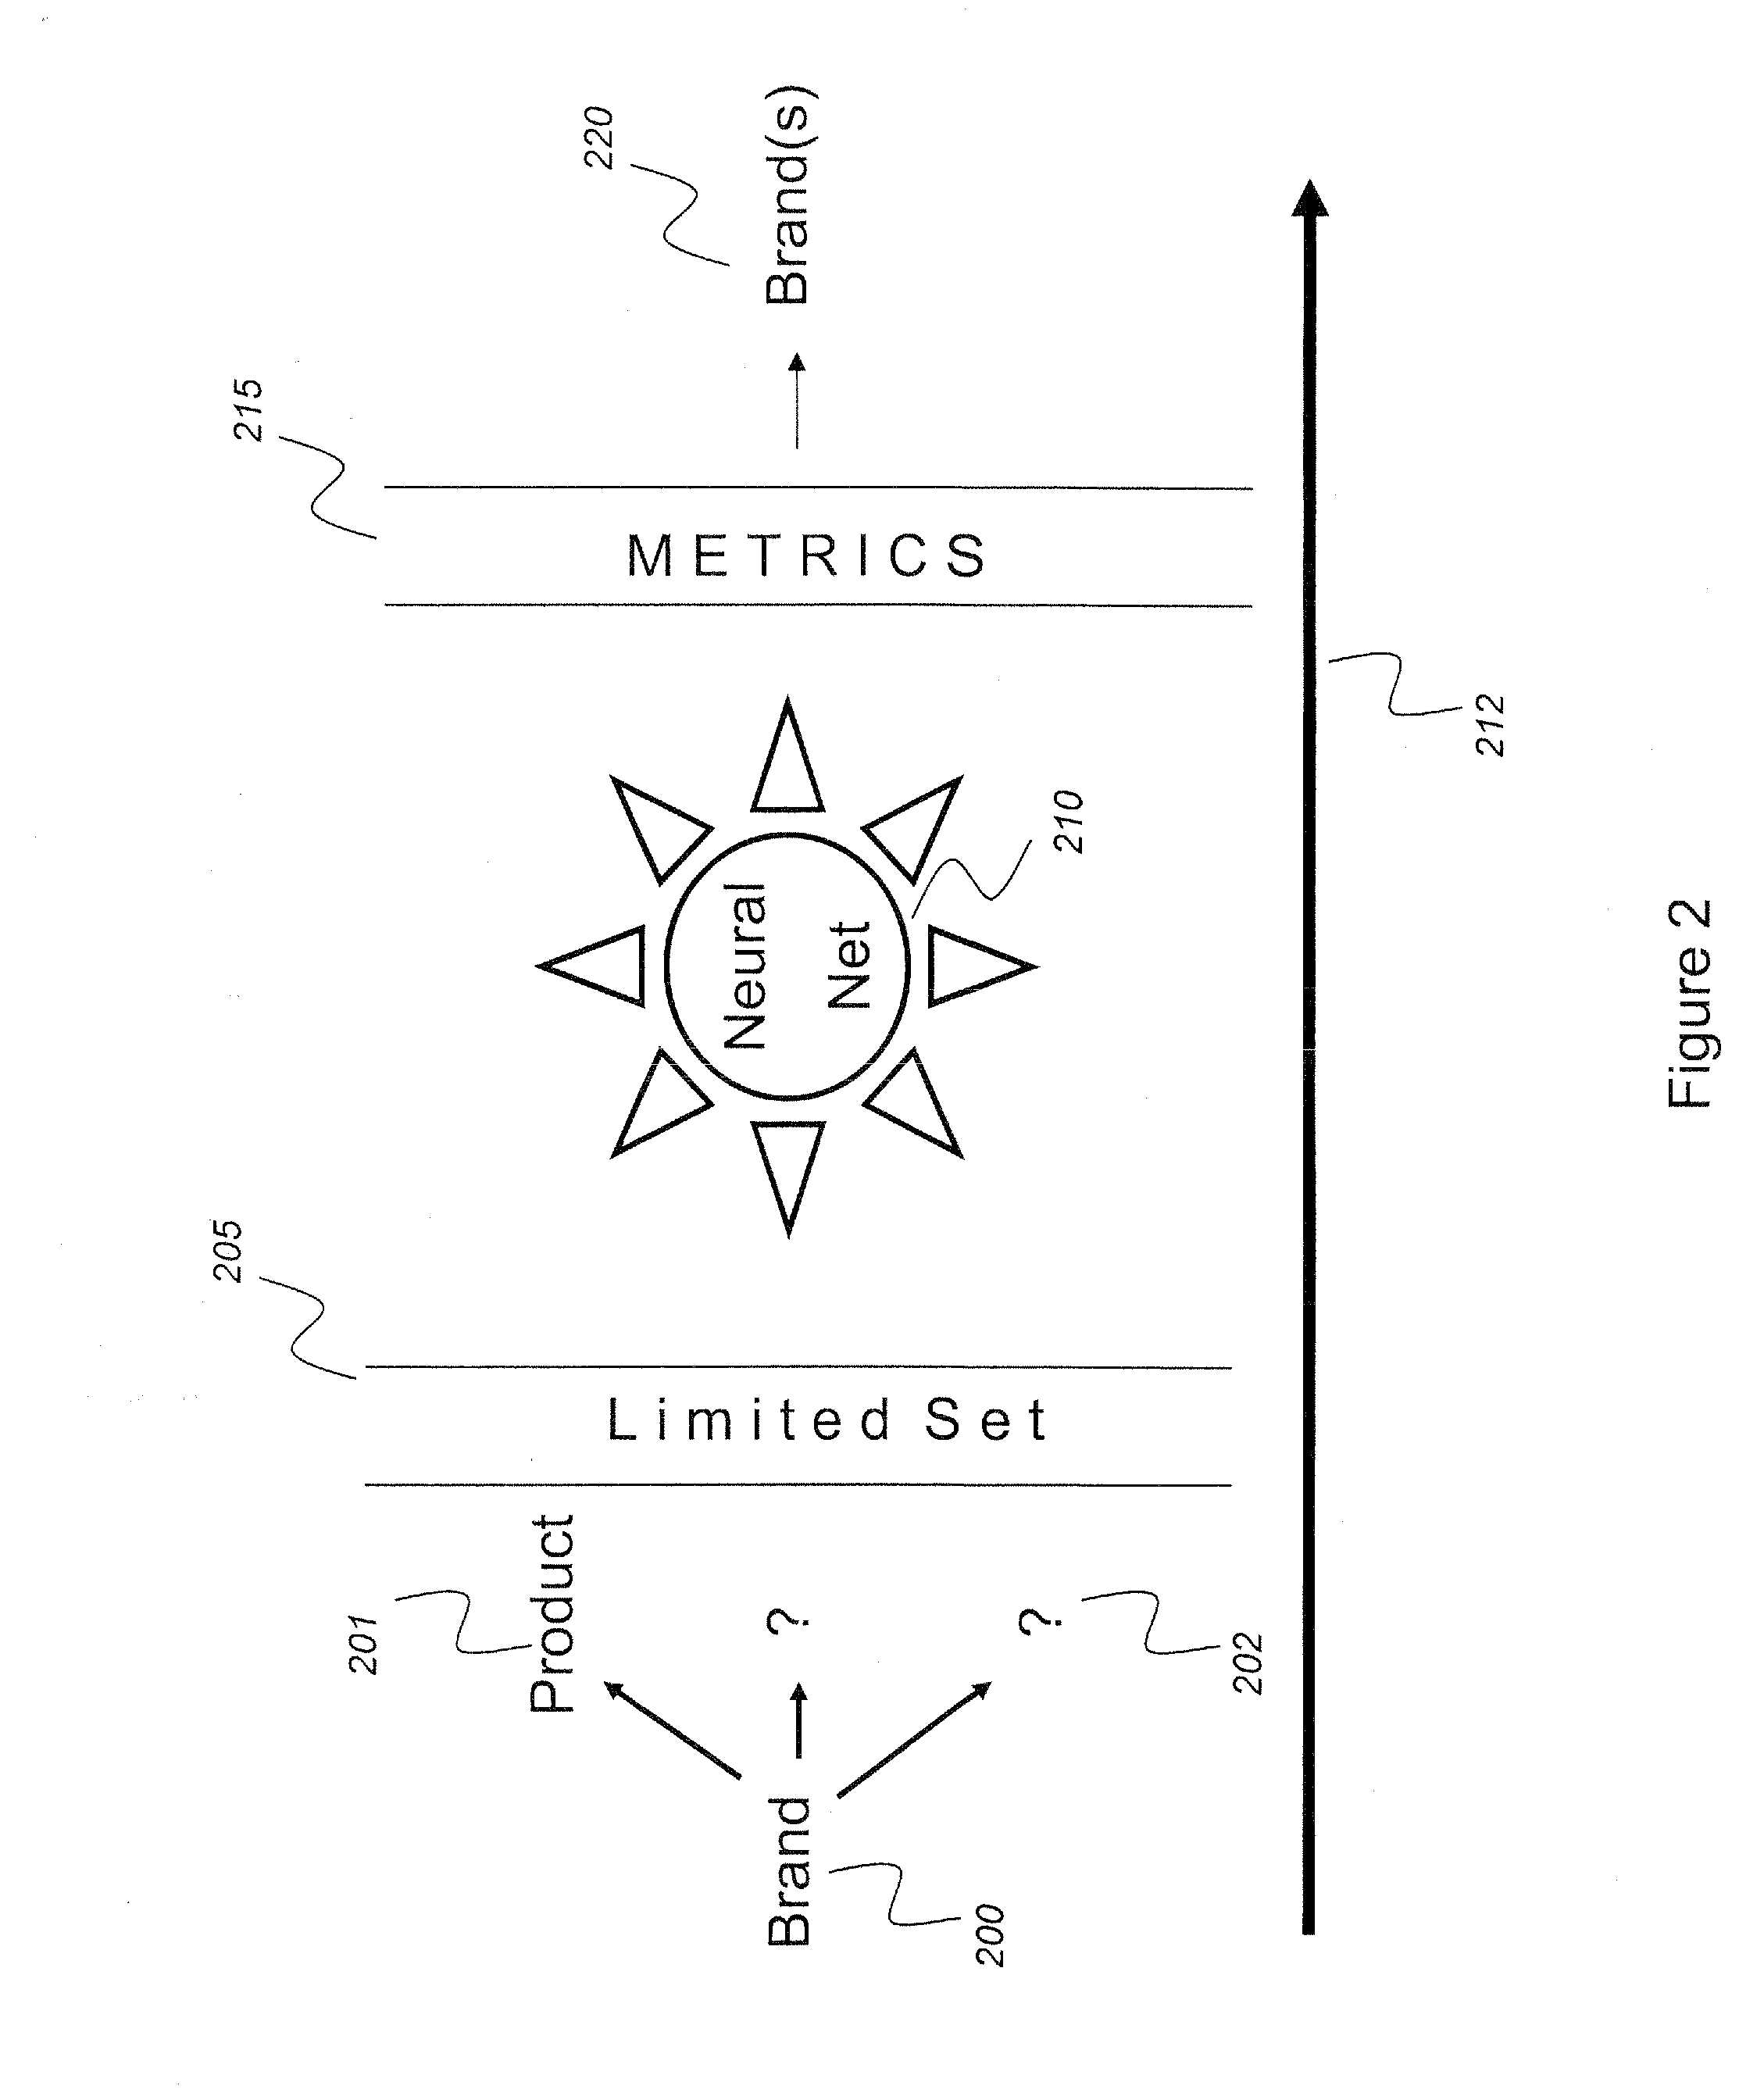 System and method for brand affinity content distribution and optimization